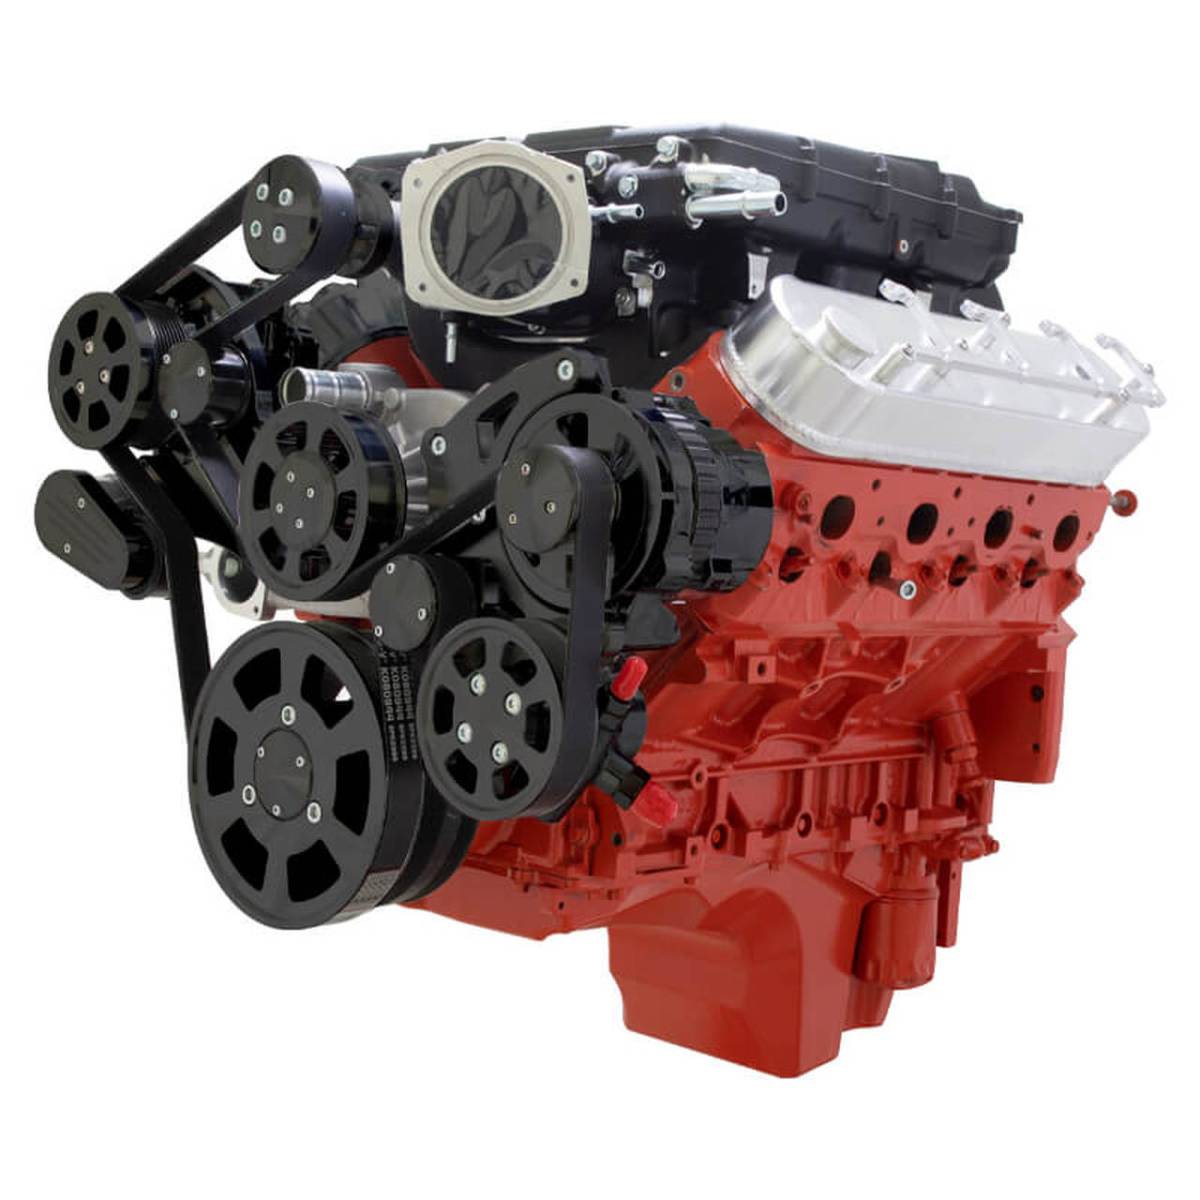 CVF Racing - CVF Wraptor Chevy LS Engine Whipple 2.3L or 2.9L Serpentine Bracket System with Alternator AC and Power Steering - Black - Image 1